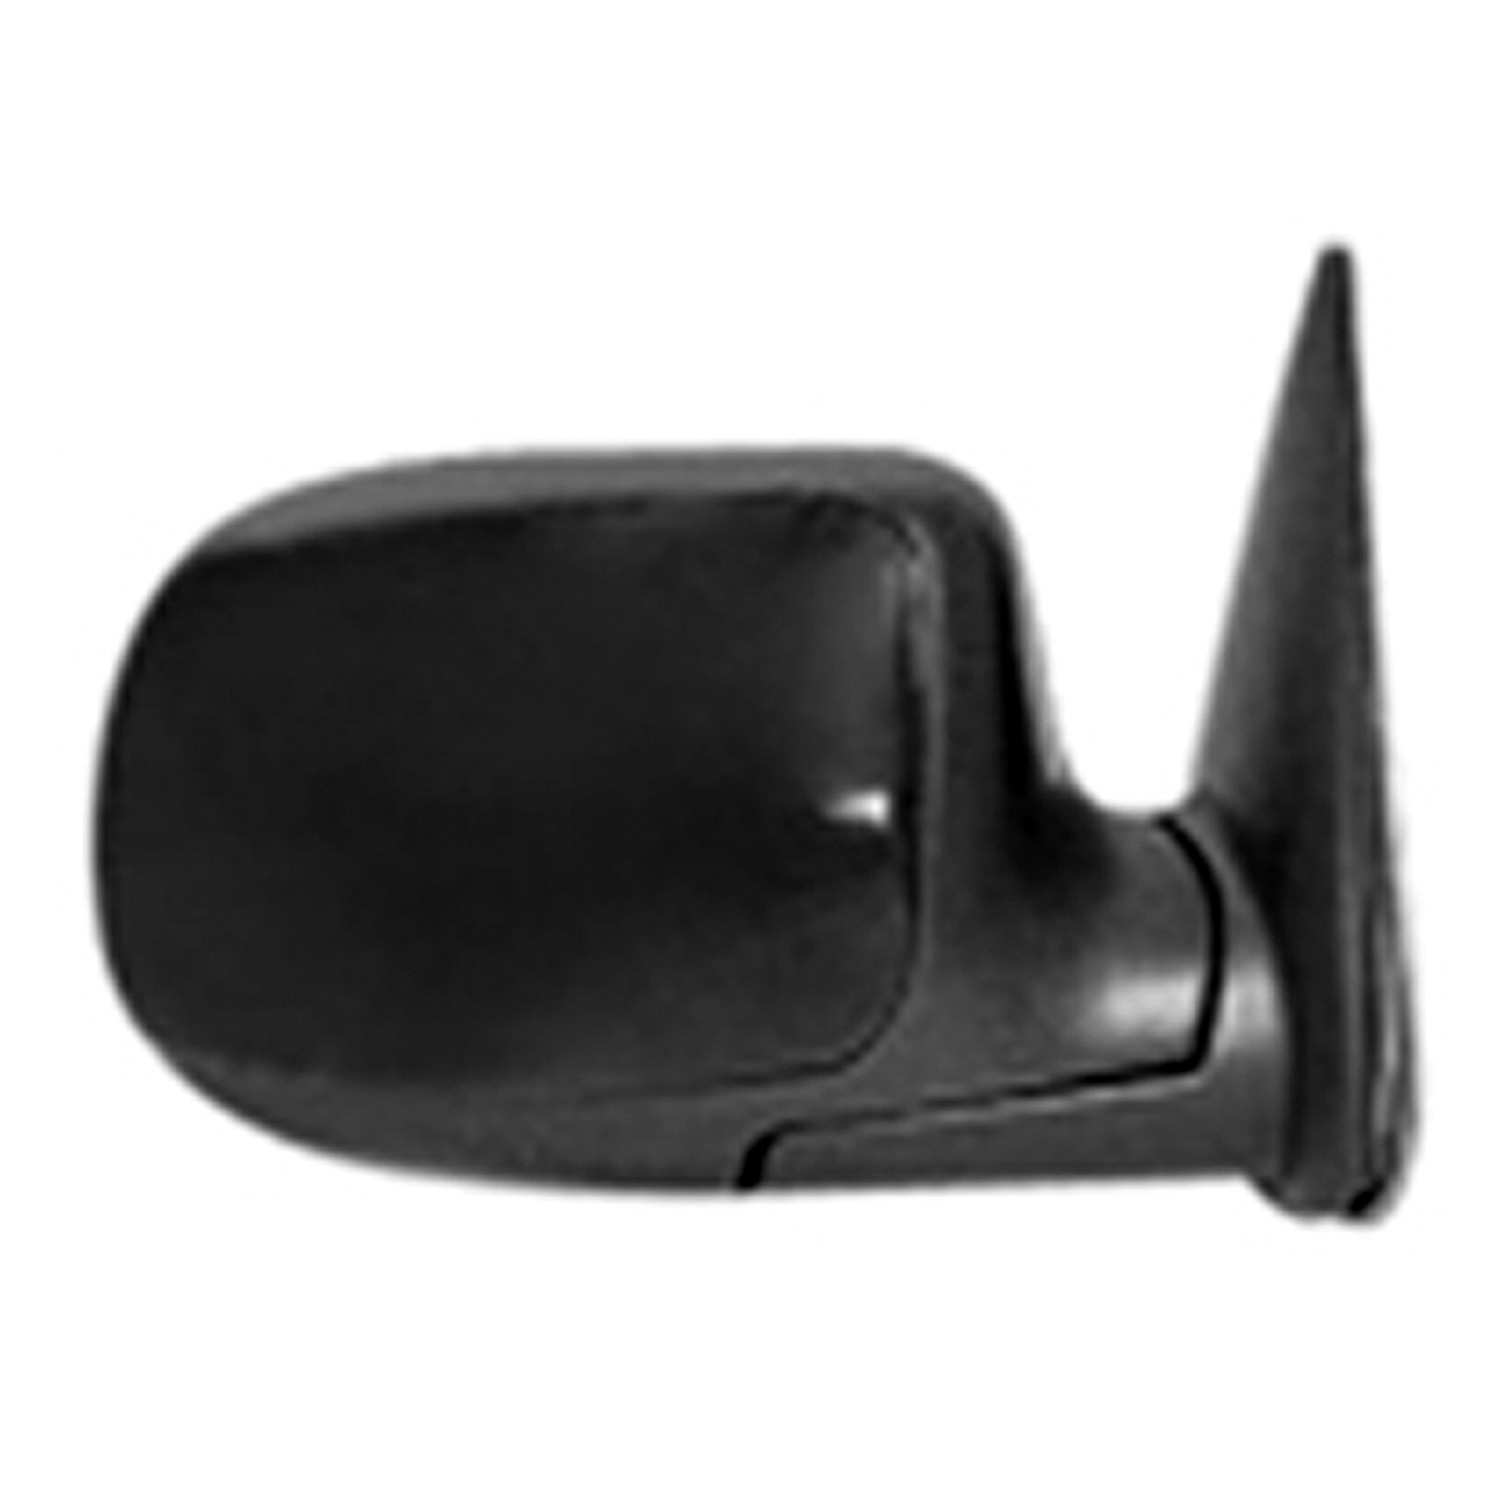 for 2001 - 2006 Chevrolet (Chevy) Tahoe Side View Mirror - Left (Driver) - 2005 | eBay 2001 Chevy Tahoe Driver Side Mirror Replacement